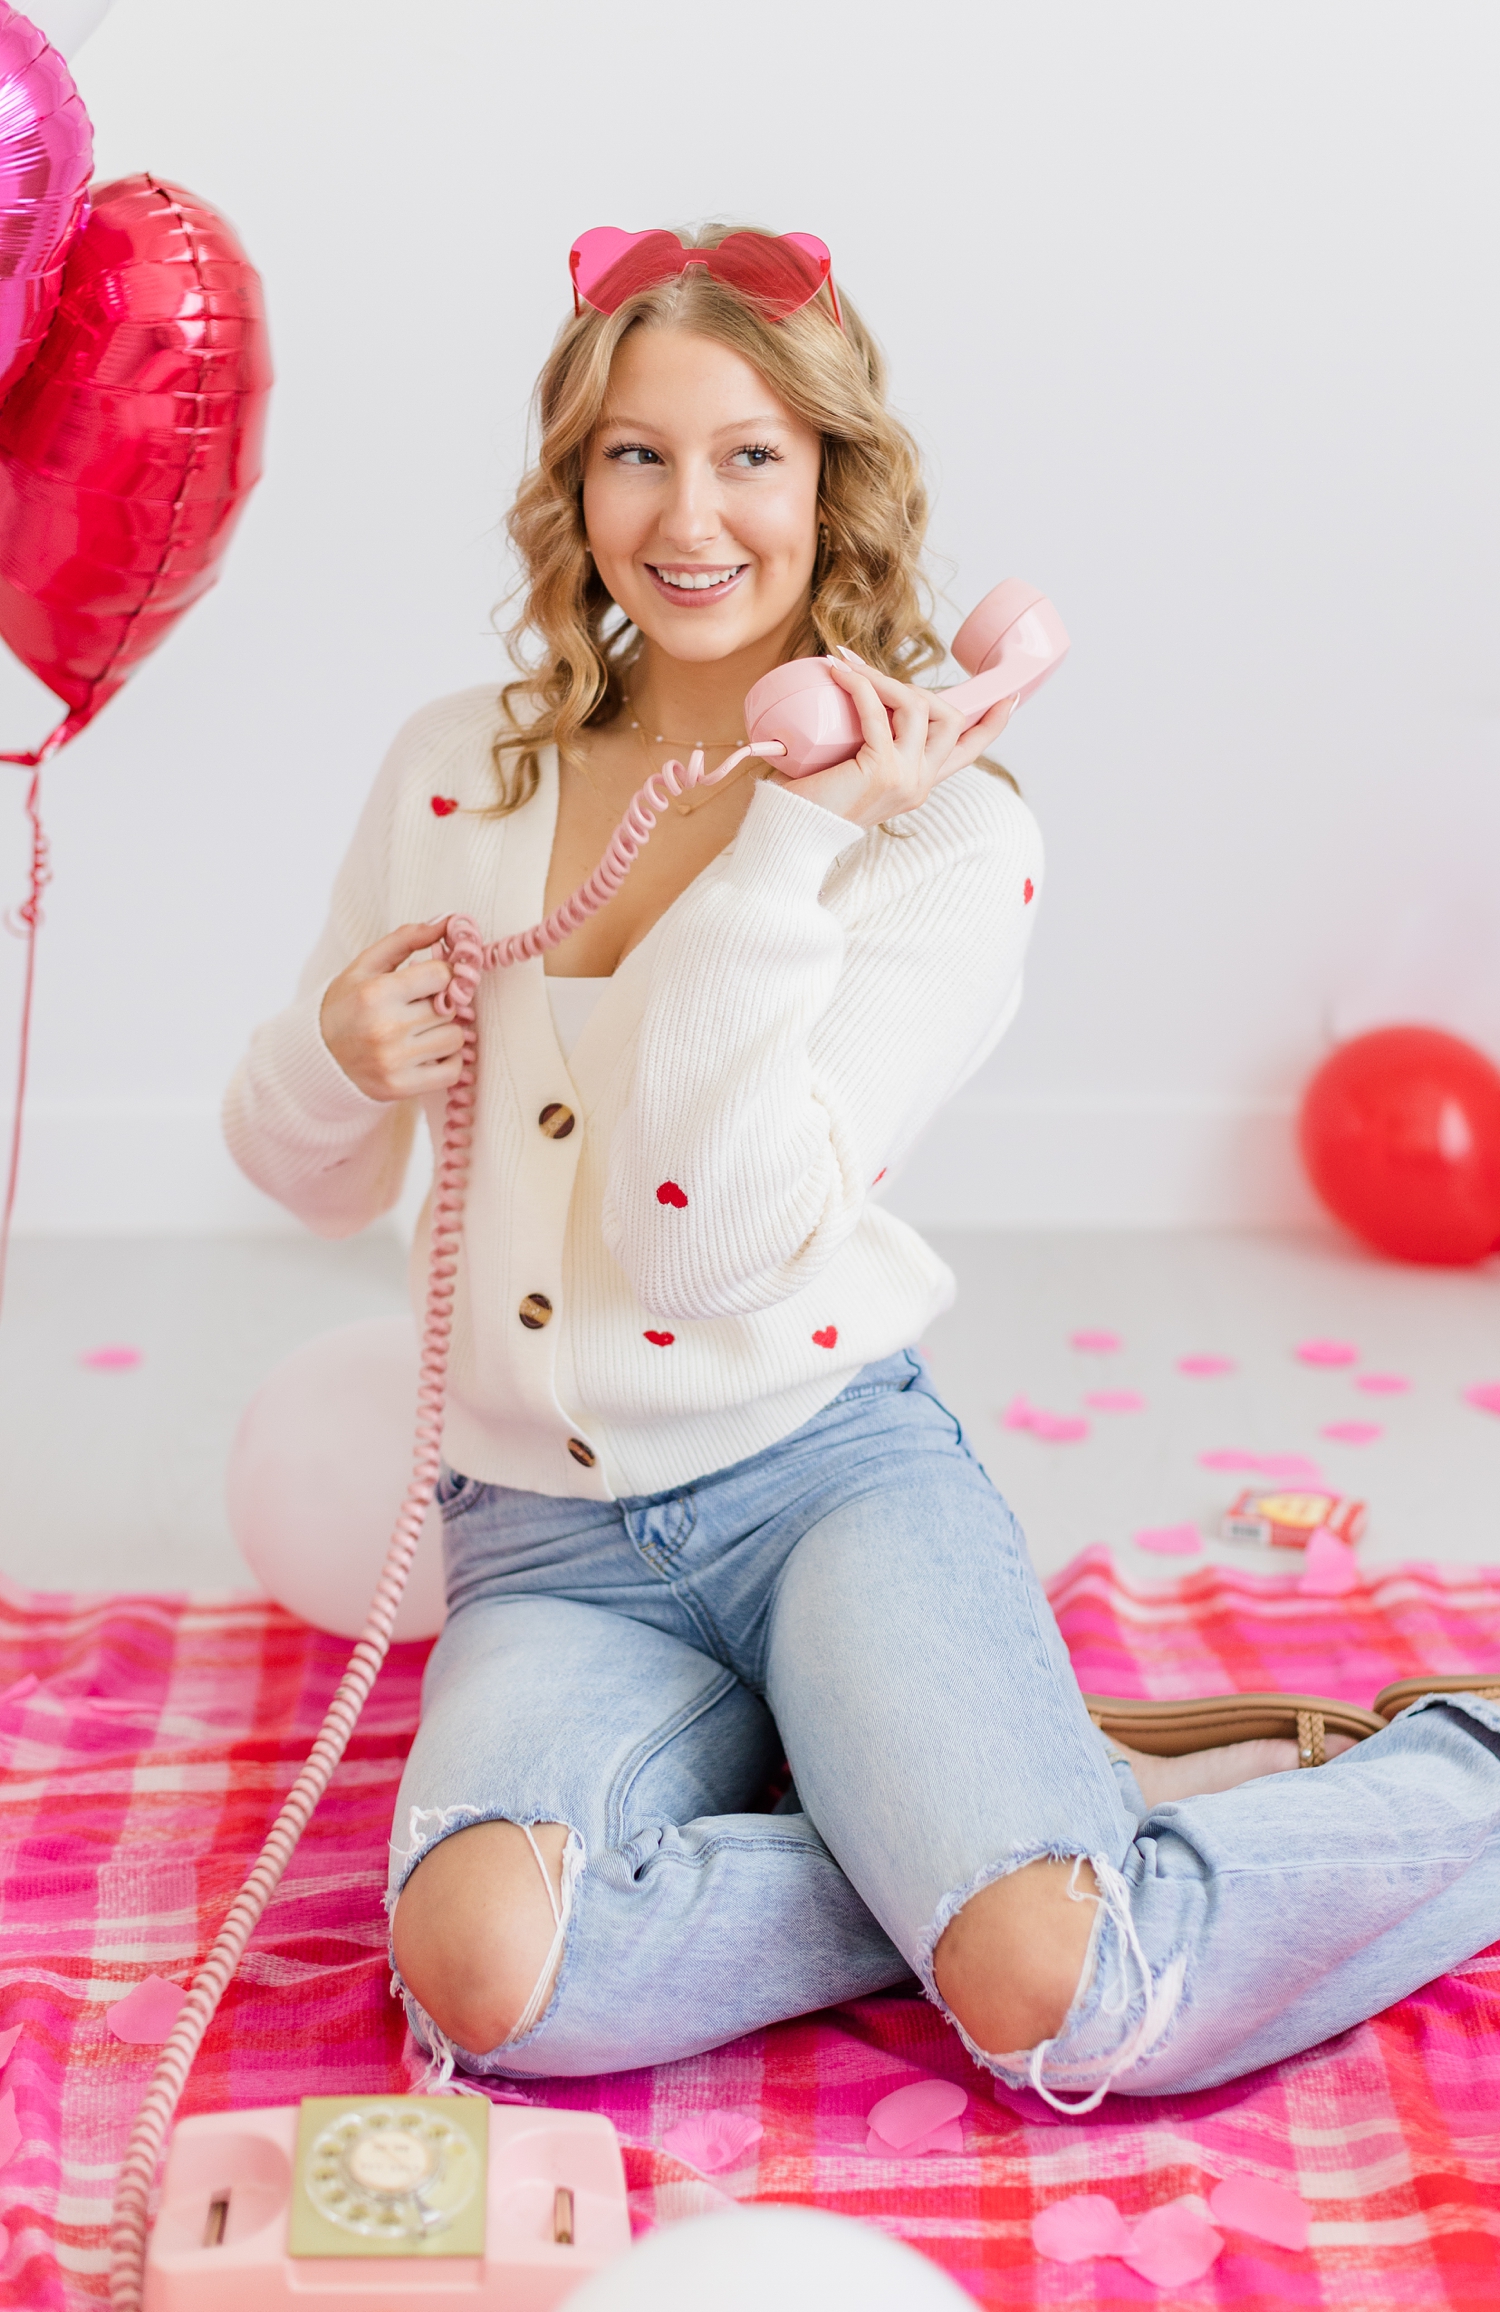 Ryley talks on her pink rotary phone while she twirls on the curly cord during a Galentine's styled photoshoot | CB Studio